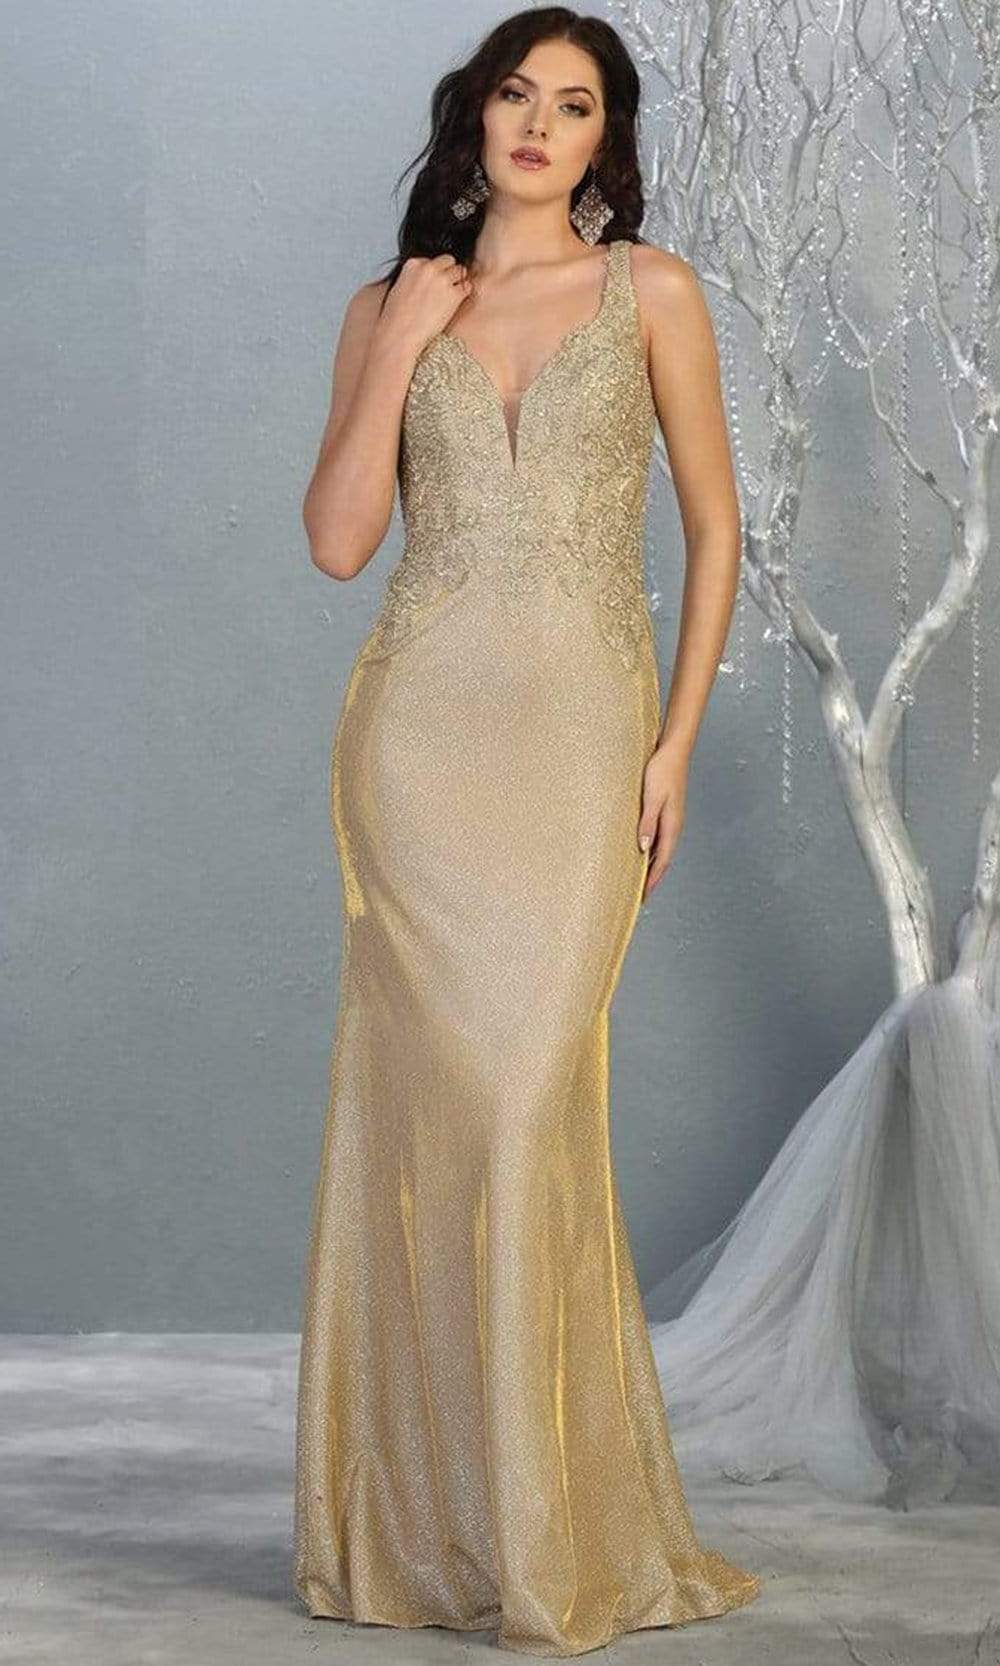 May Queen - Lace Appliqued Sleeveless Trumpet Gown MQ1744SC In Gold